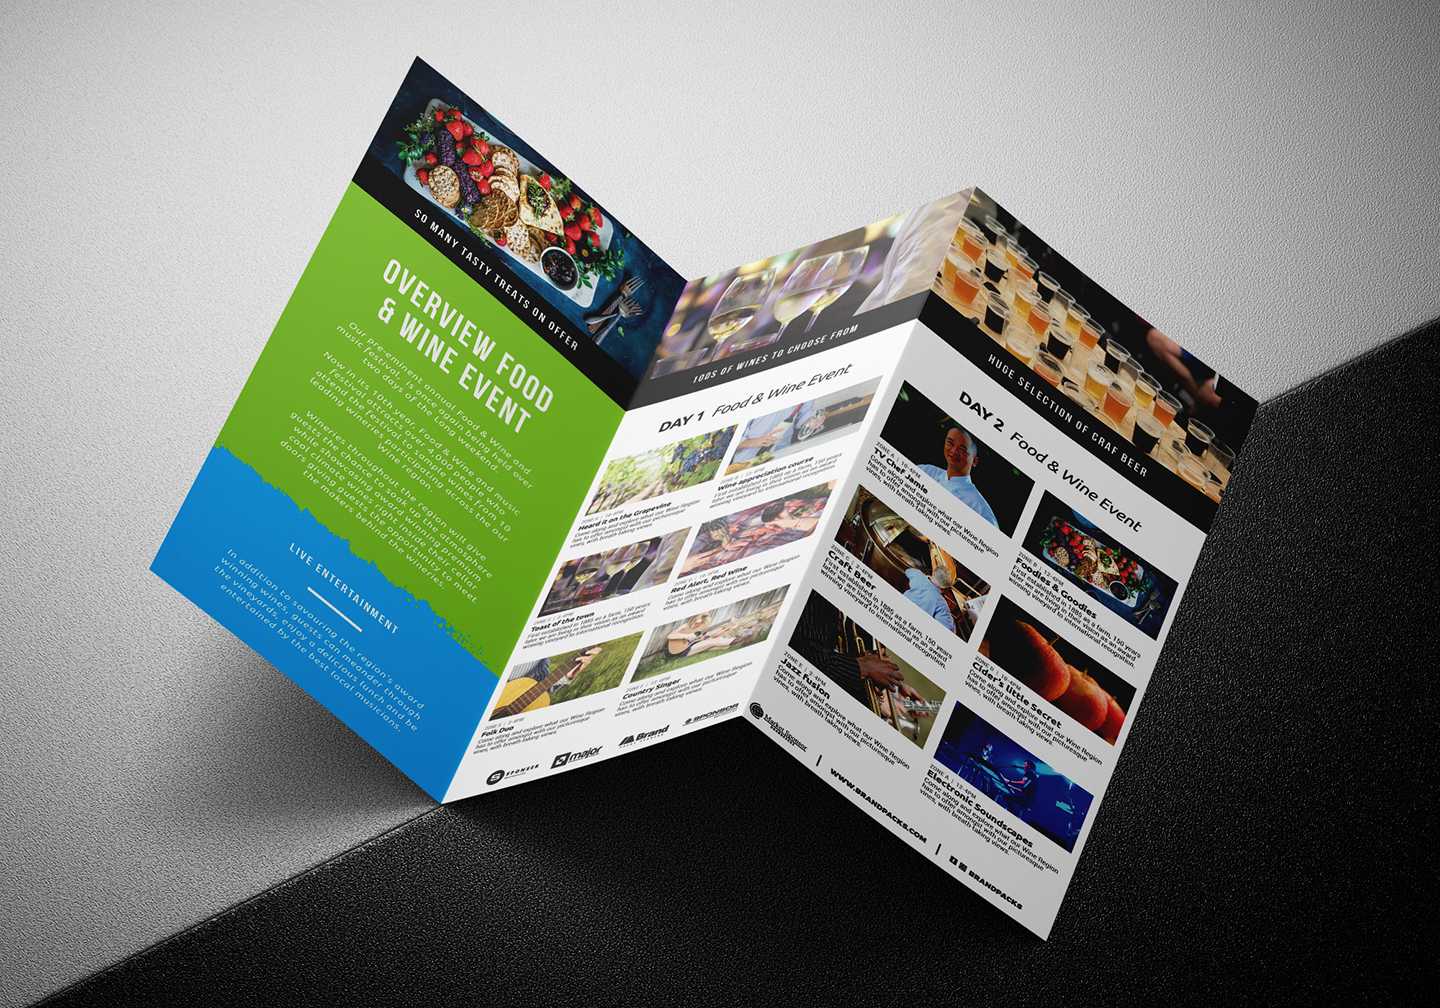 Free Tri Fold Brochure Template For Events & Festivals – Psd With Tri Fold Brochure Template Illustrator Free